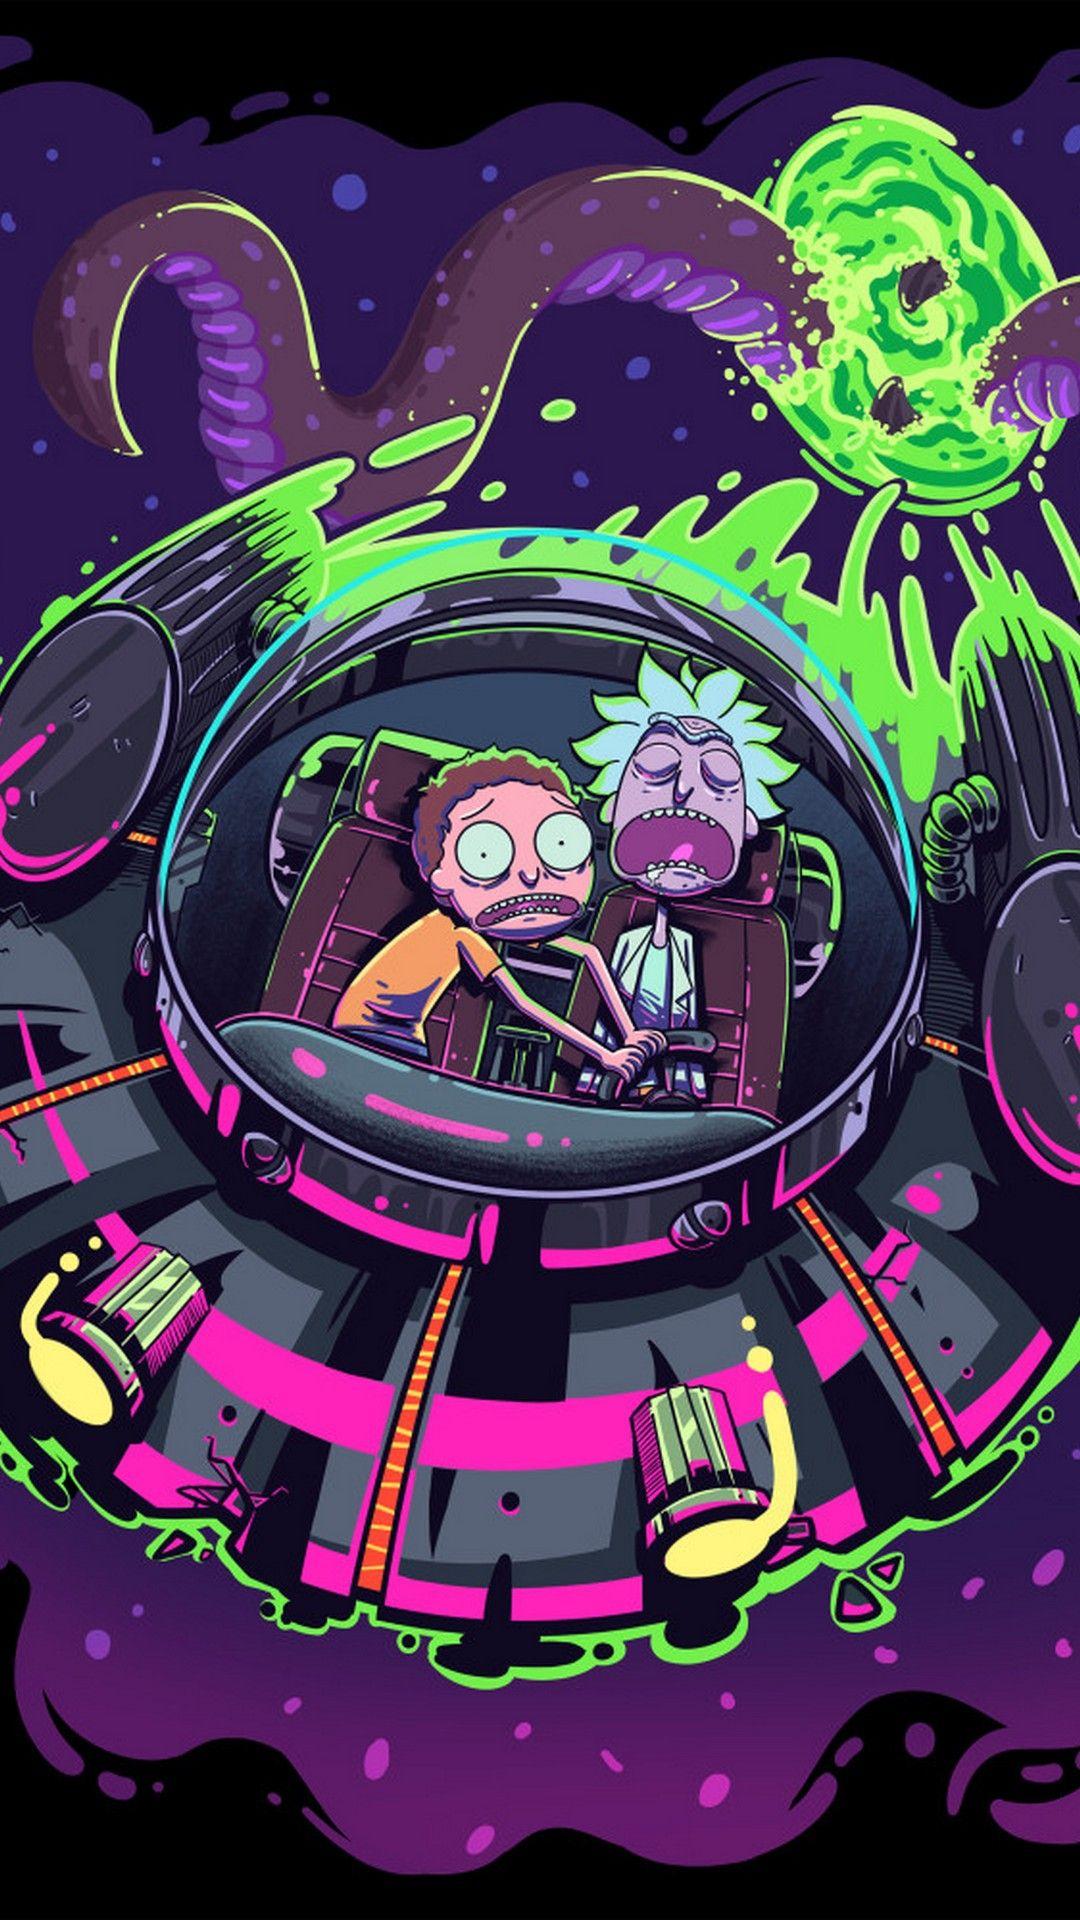 Rick and Morty Wallpapers - Top Free Rick and Morty Backgrounds